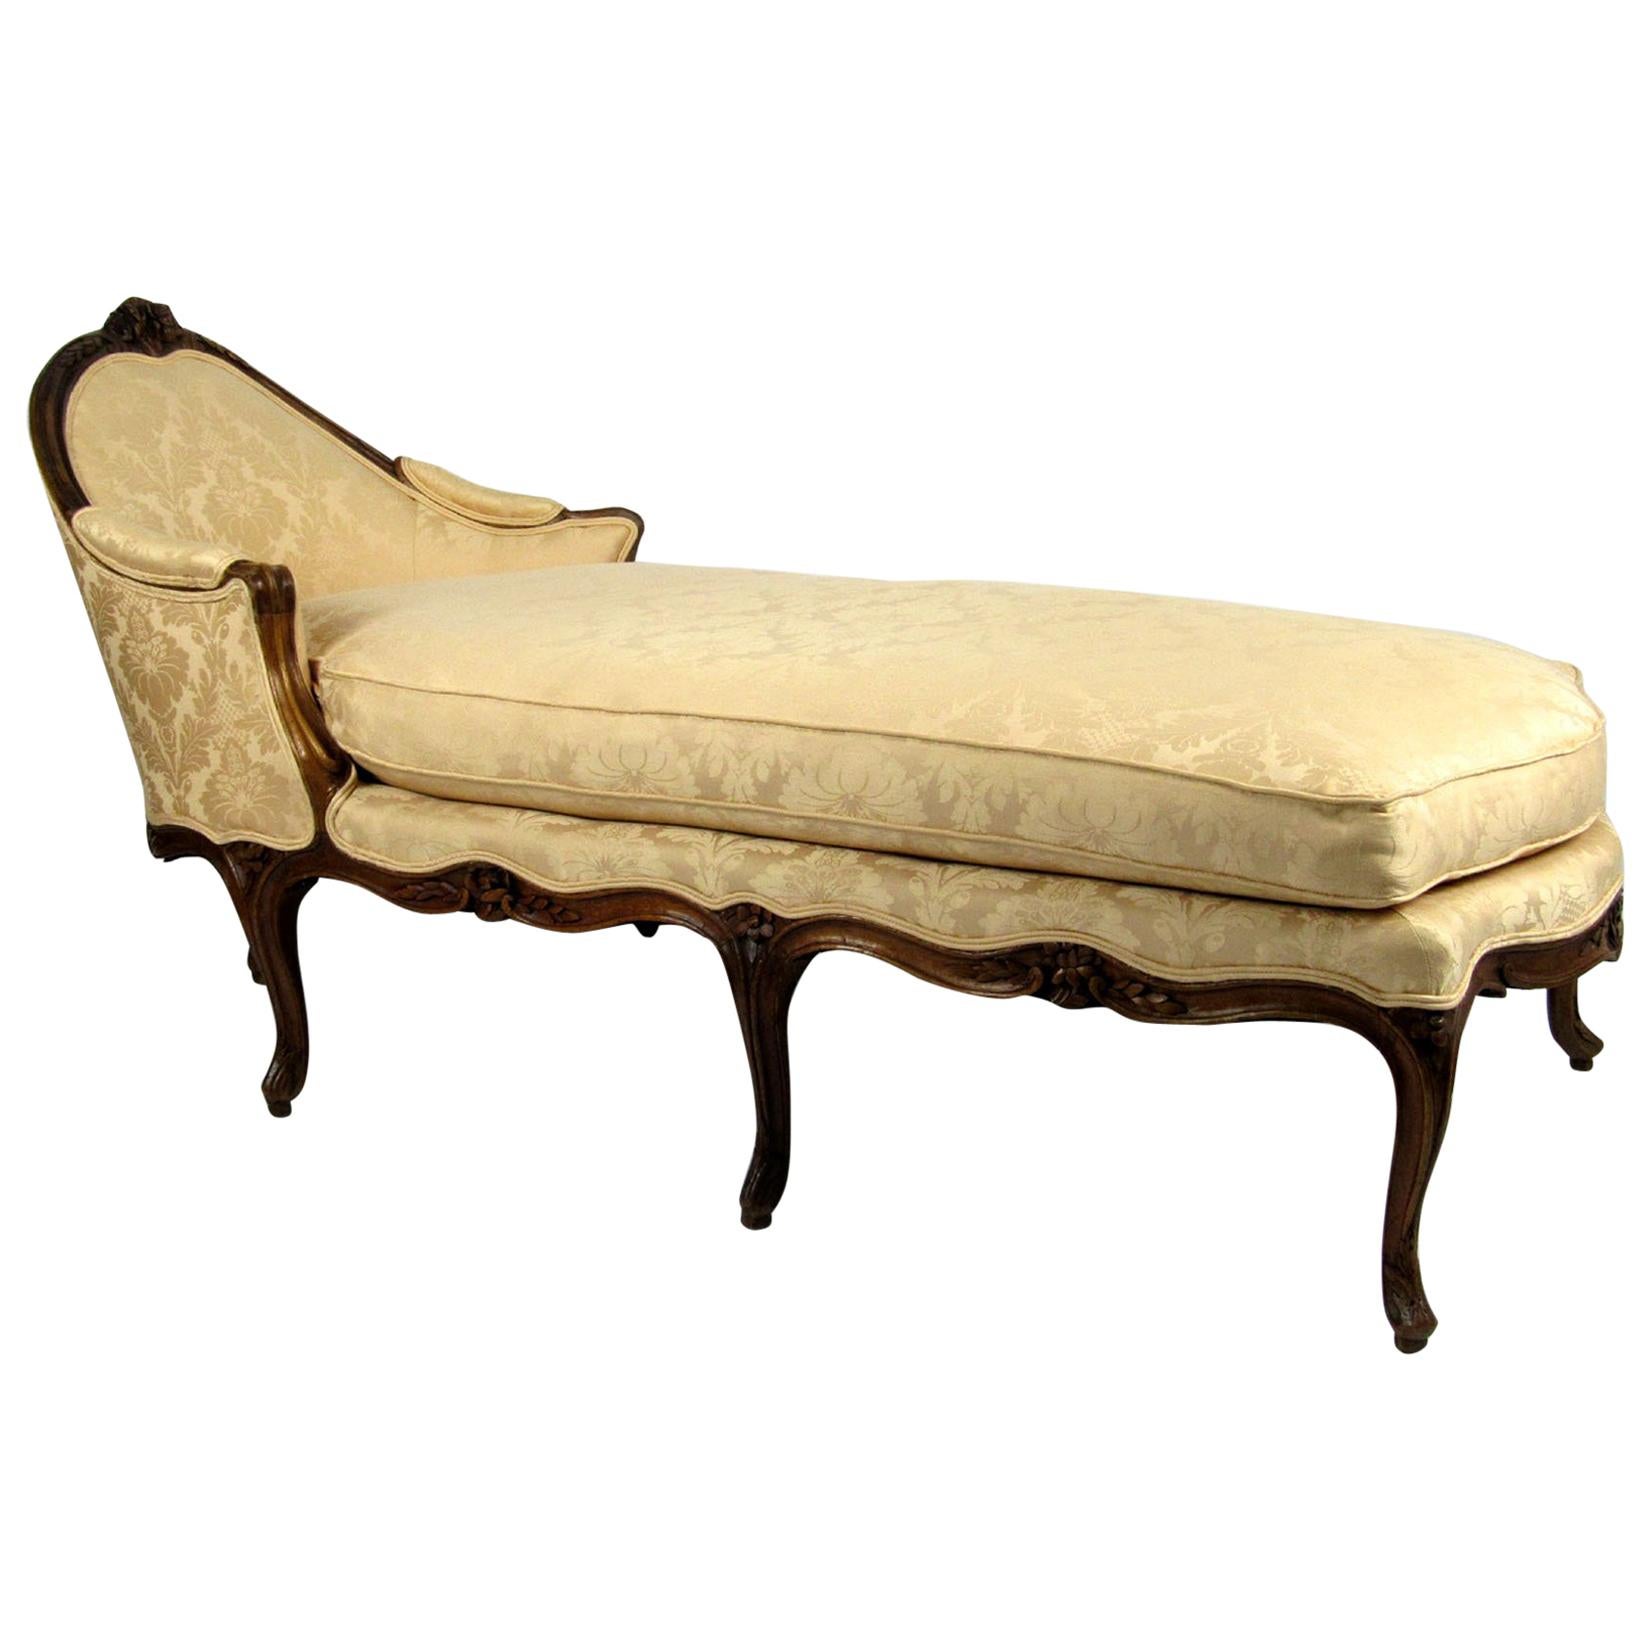 Early 20th Century Louis XV Style Chaise Lounge For Sale